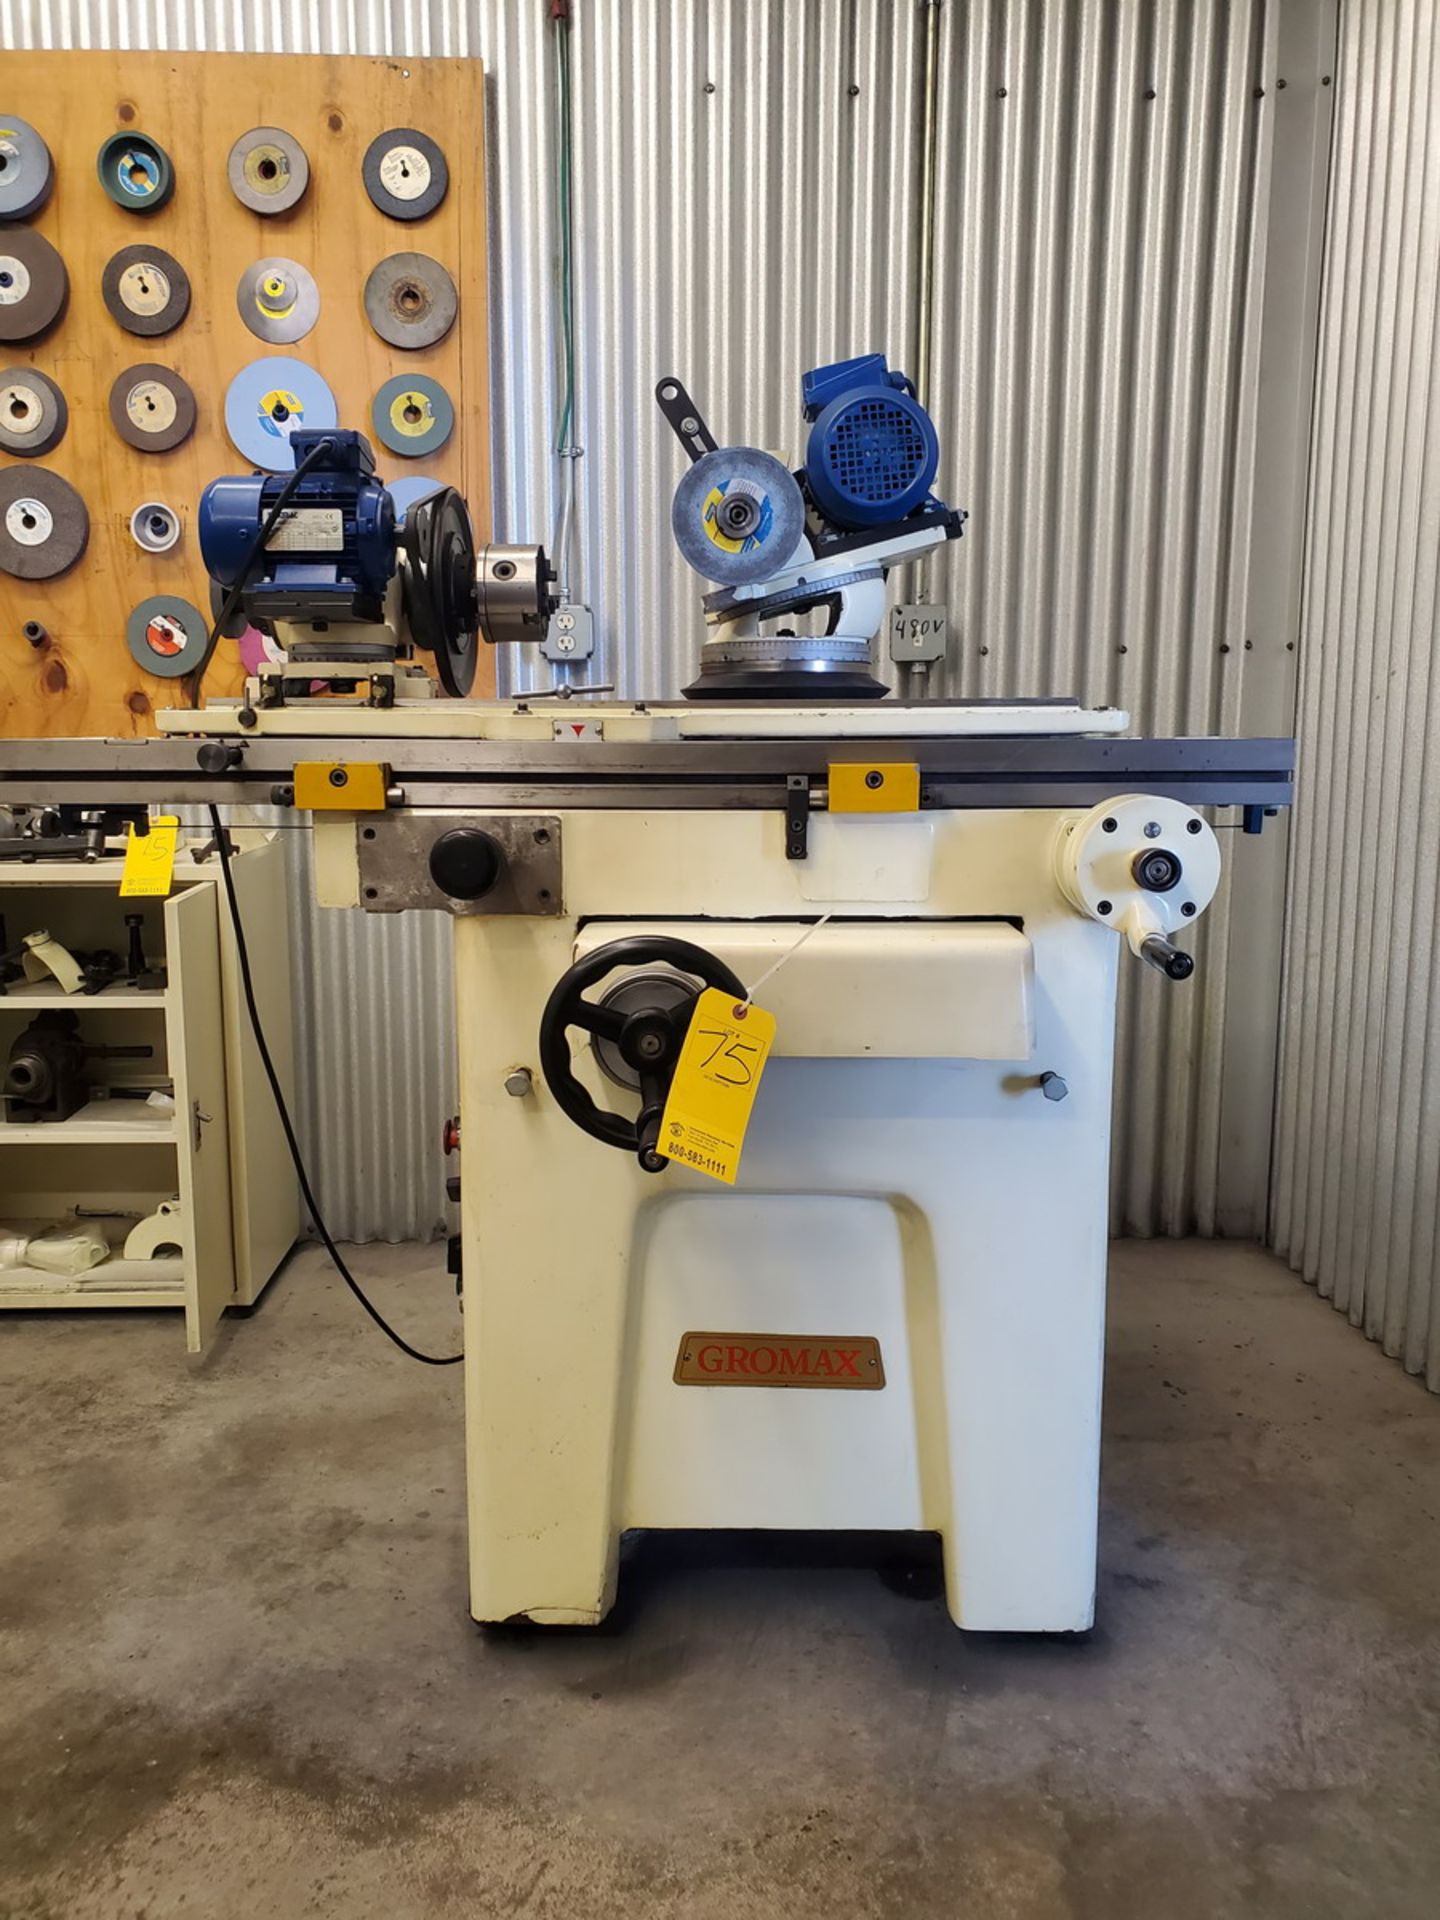 2008 Gomax G40 Grinder 230V, 3PH, 60HZ, W/ 4-1/2" 3-Jaw Chuck, 36" Slot Table; W/ Tooling